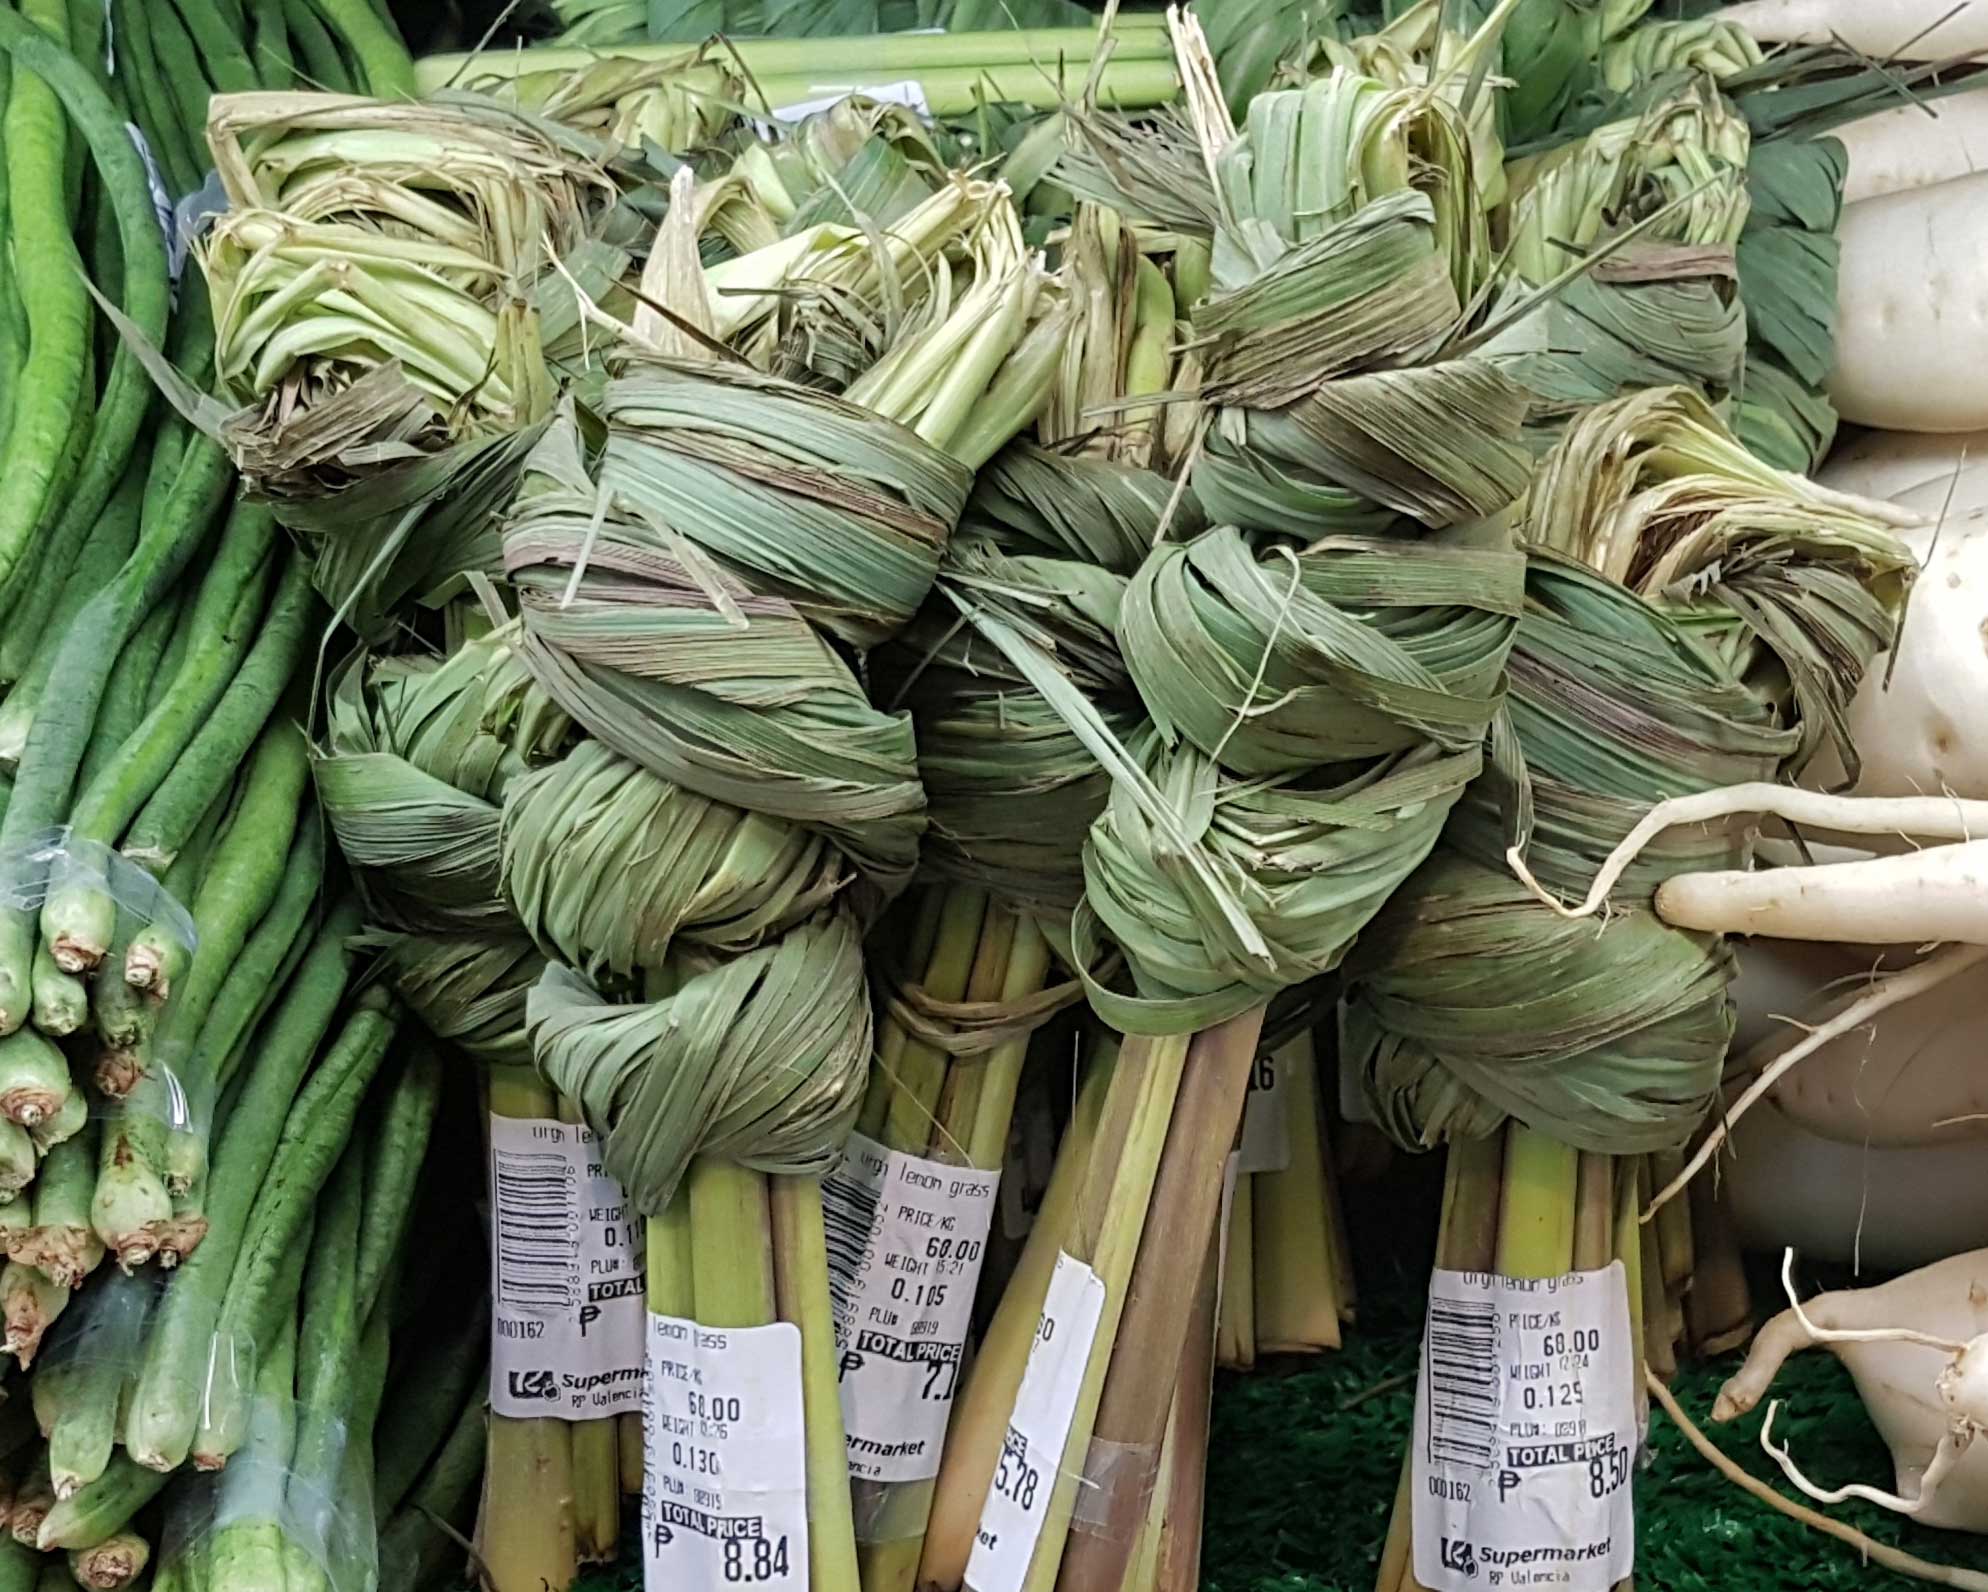 Photograph of lemongrass for sale at a supermarket in the Philippines. The photo shows bundles of lemongrass standing upright, each with a knotted top. Labels on the sides of the bundles give the prices.